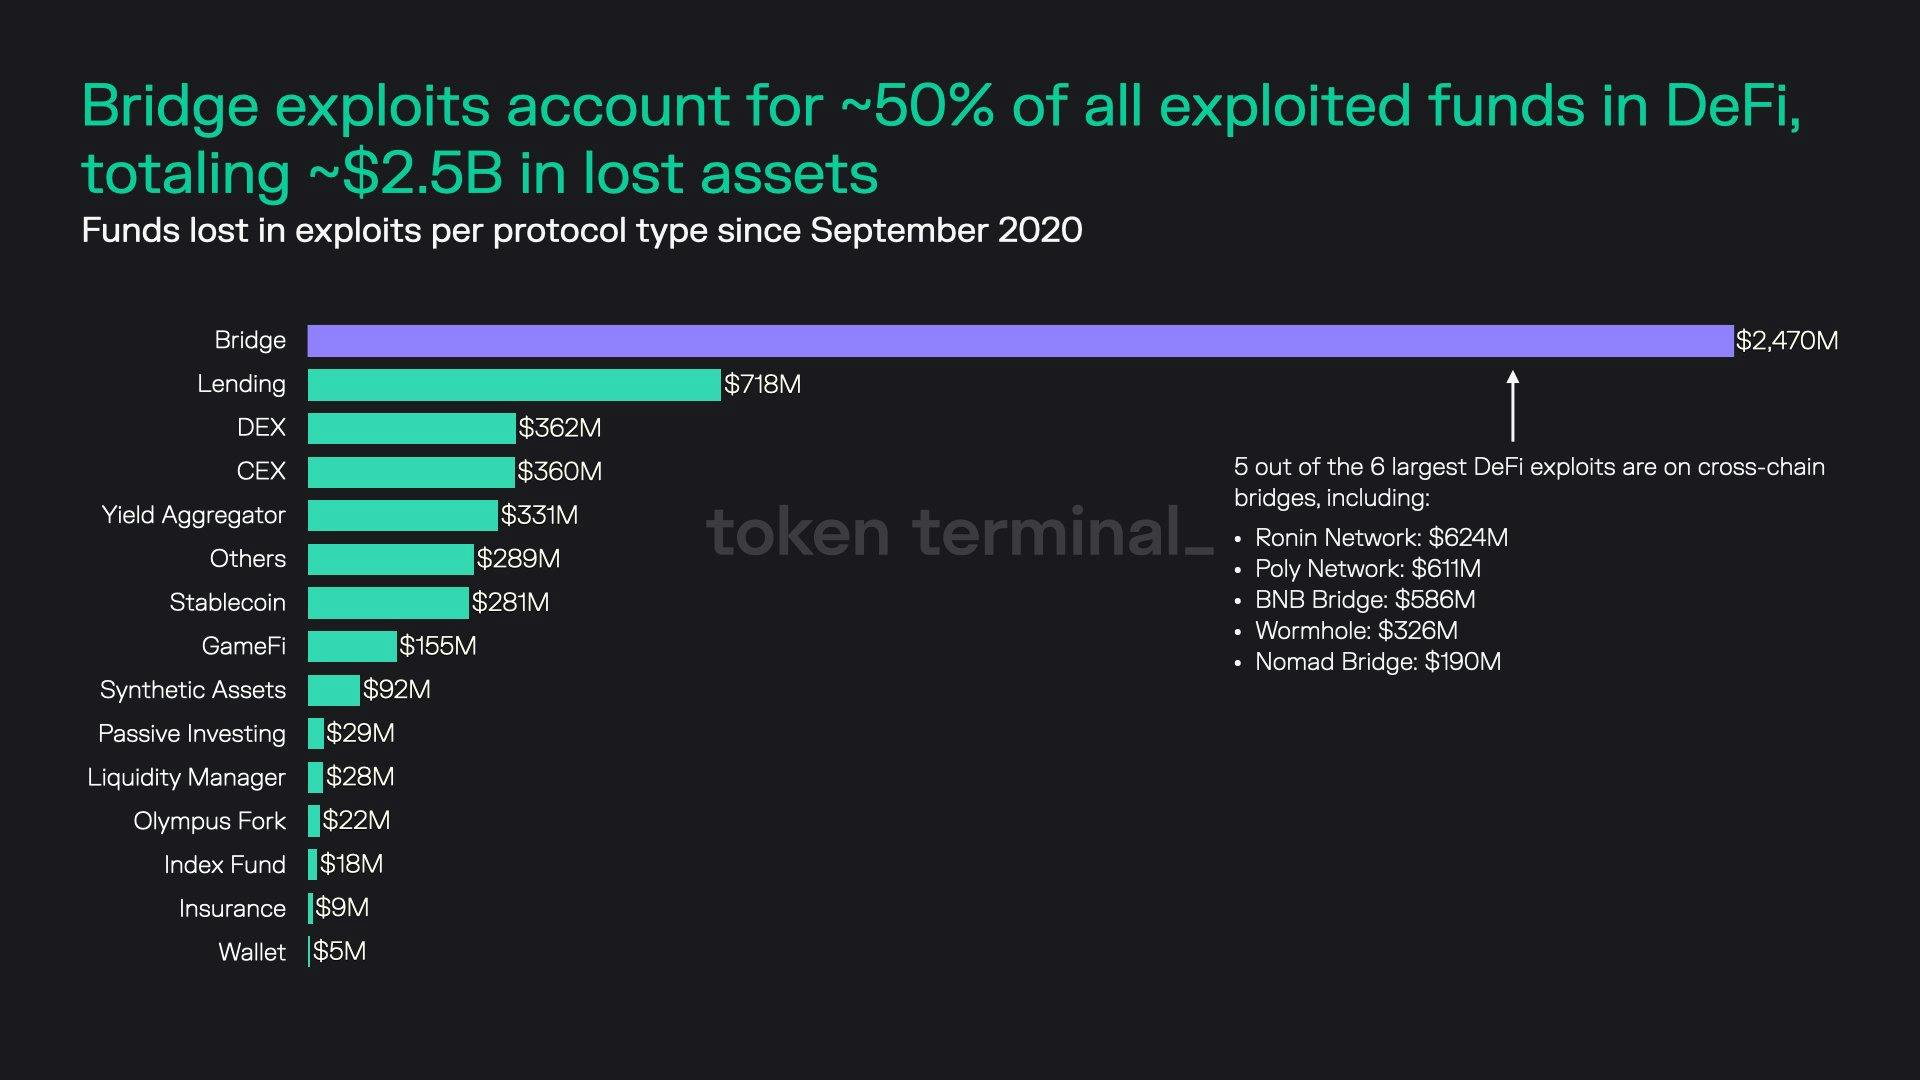 Bridges are the largest target of exploits, dwarfing the rest of the DeFi ecosystem.